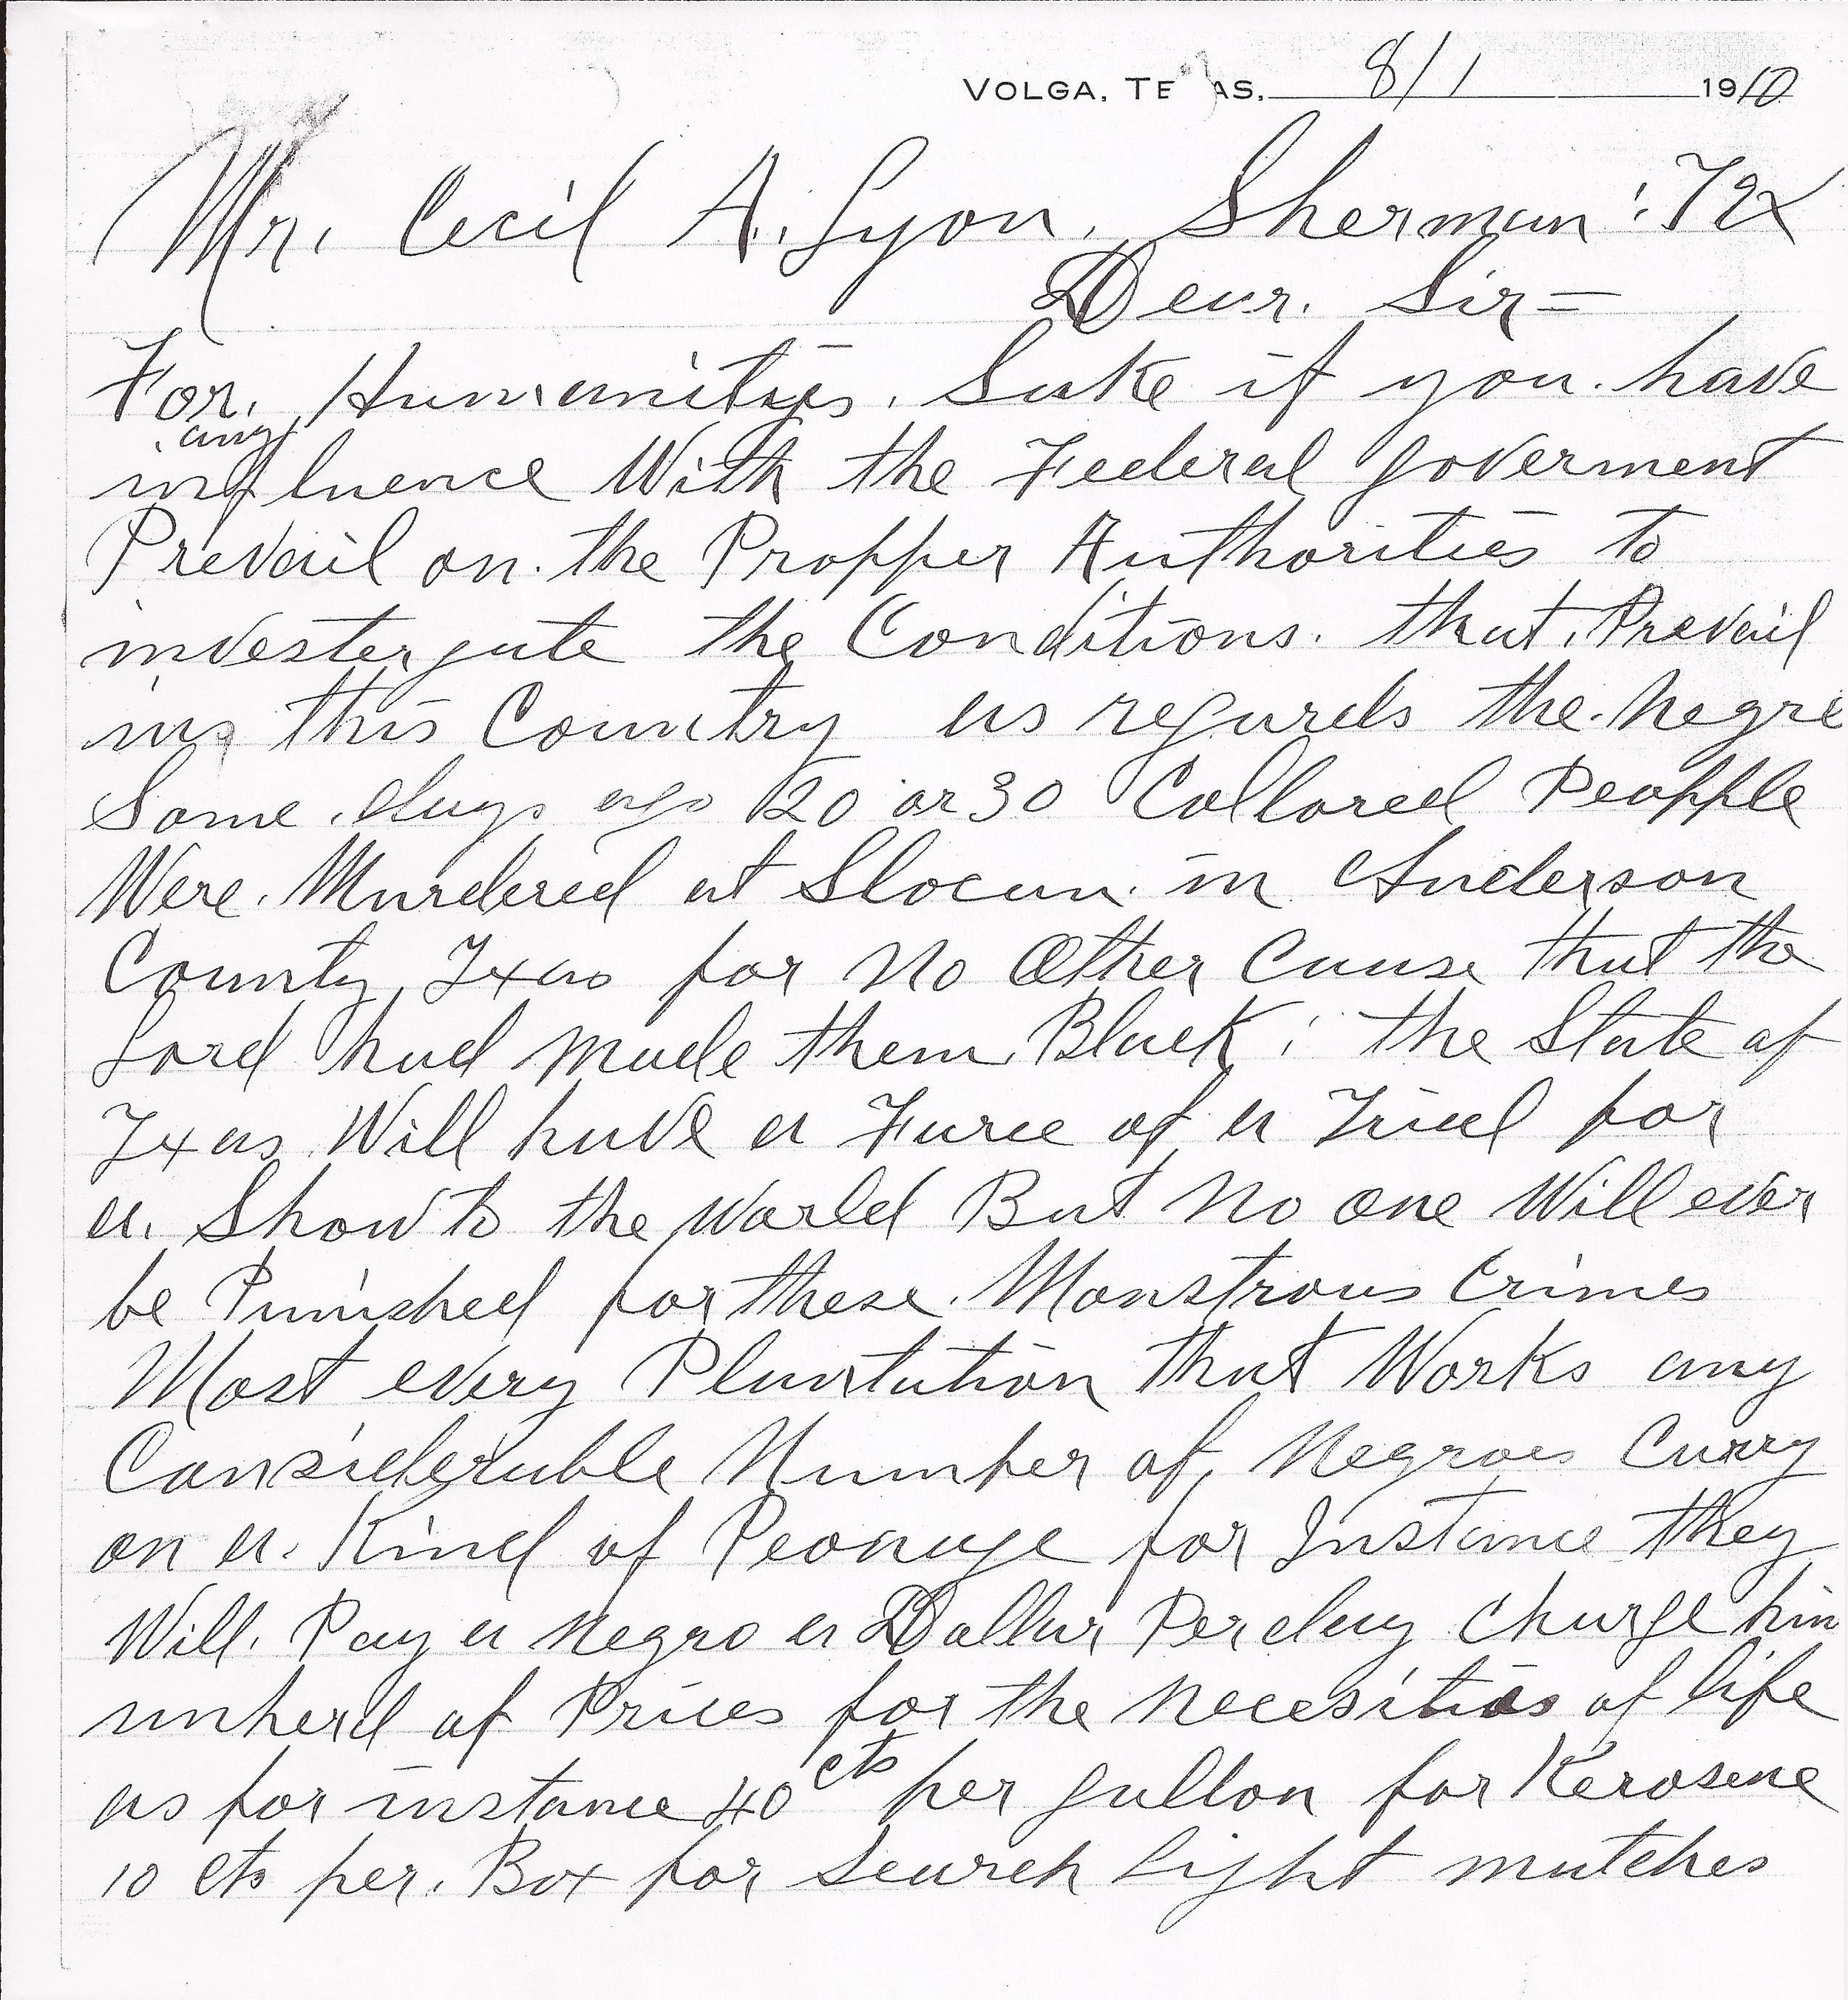  John A. Siddon to Cecil A. Lyon, August 1, 1910 (Page 1) (United States Department of Justice, file no. 152961, R.G. 60, 1910) 